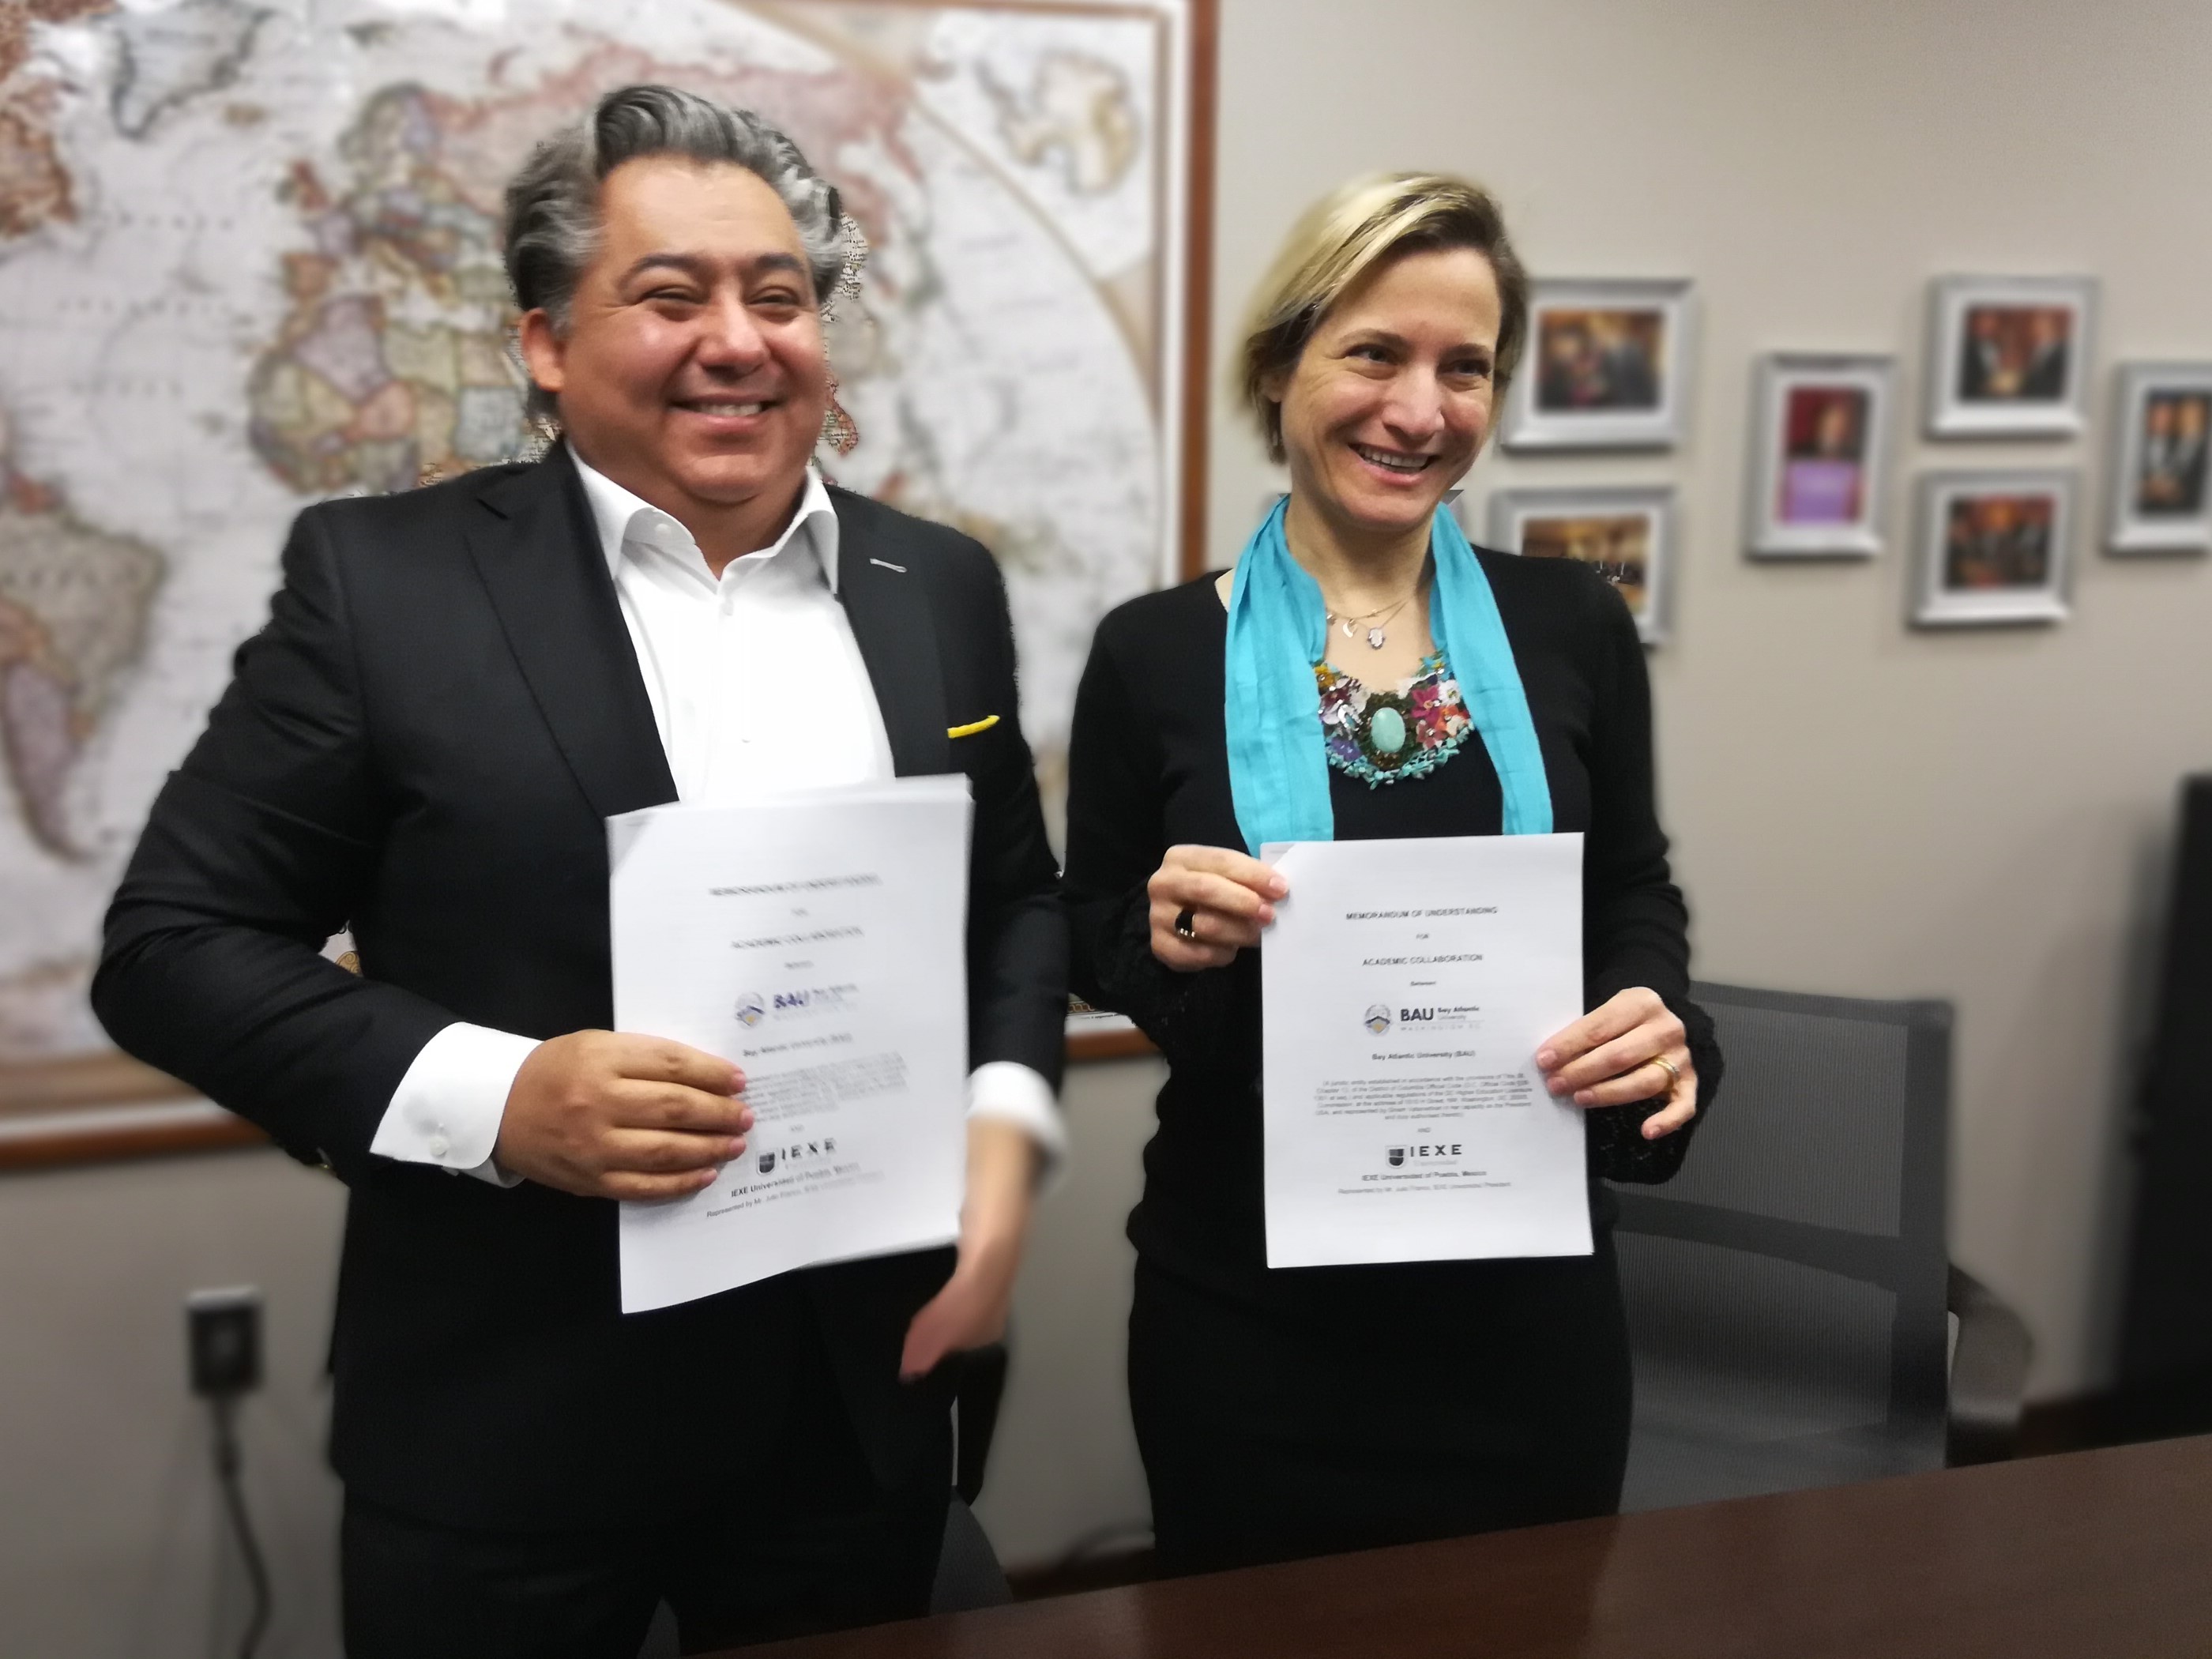 BAU signed an Agreement with a Mexican University IEXE